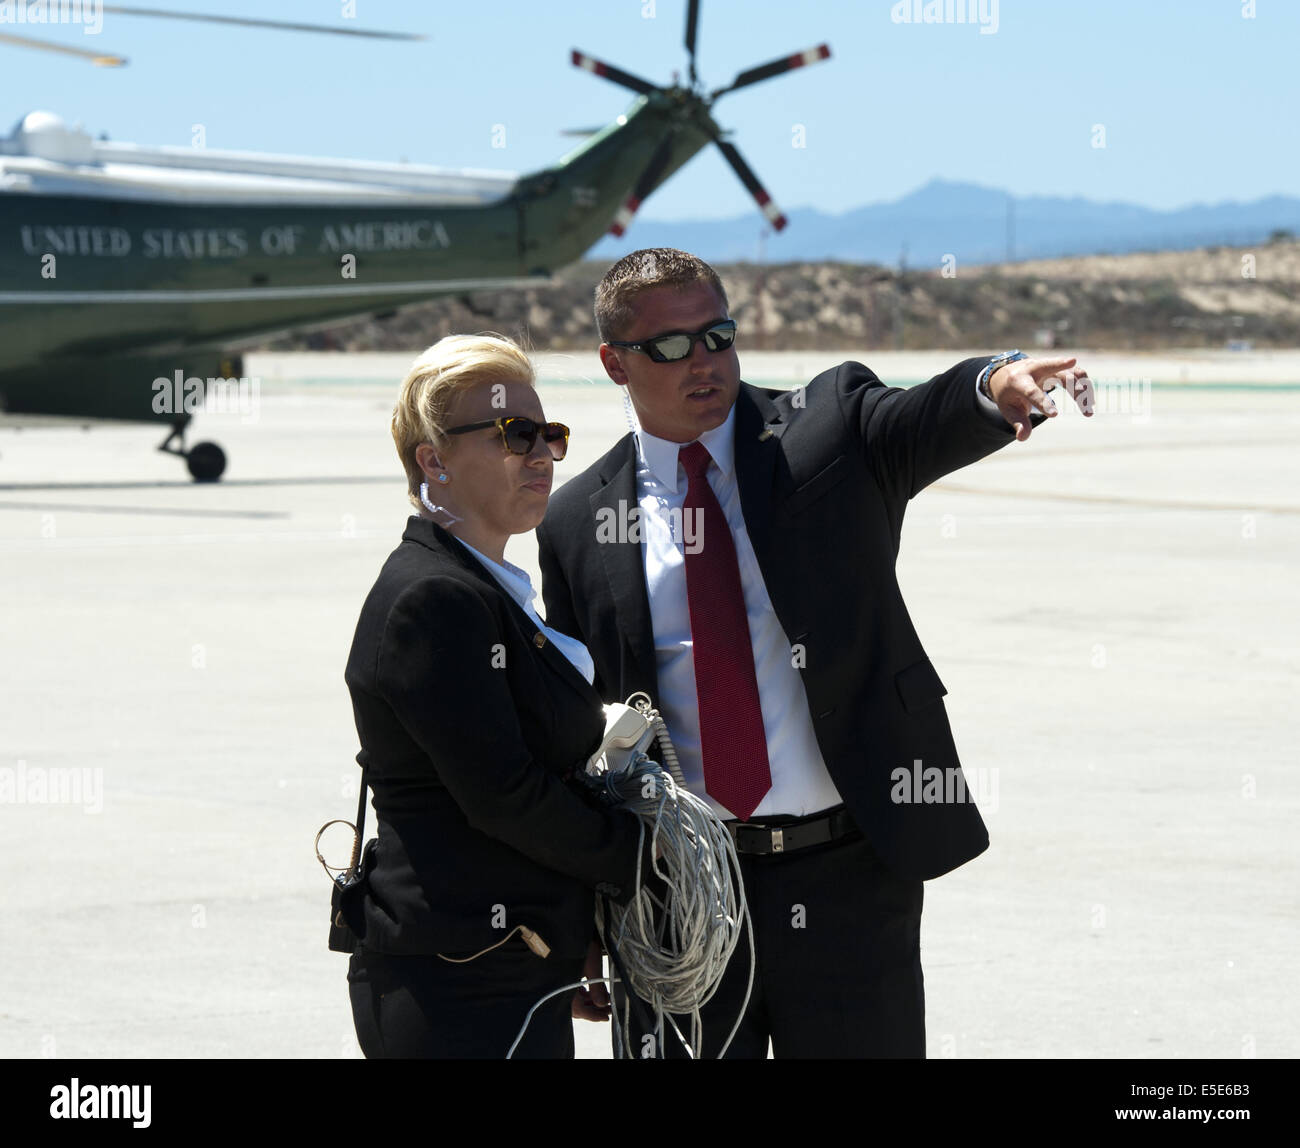 July 23, 2014 - Los Angeles, California, U.S - Marine One --- Marine One on the tarmac at LAX on Wednesday July 23, 2014, as two Secret Service Agents confer before the arrival of President Barack Obama.  Sikorsky's SH-3 Sea King helicopter has been in use by the US Marine Corps' HMX-1 squadron as the first choice for Marine One since not long after it was placed in service by the US Navy in 1961.  The familiar metallic green with white top Sea King is transported, along with the presidential limousine and other large equipment via a set of several C-17 Boeing Globemaster transport aircraft op Stock Photo